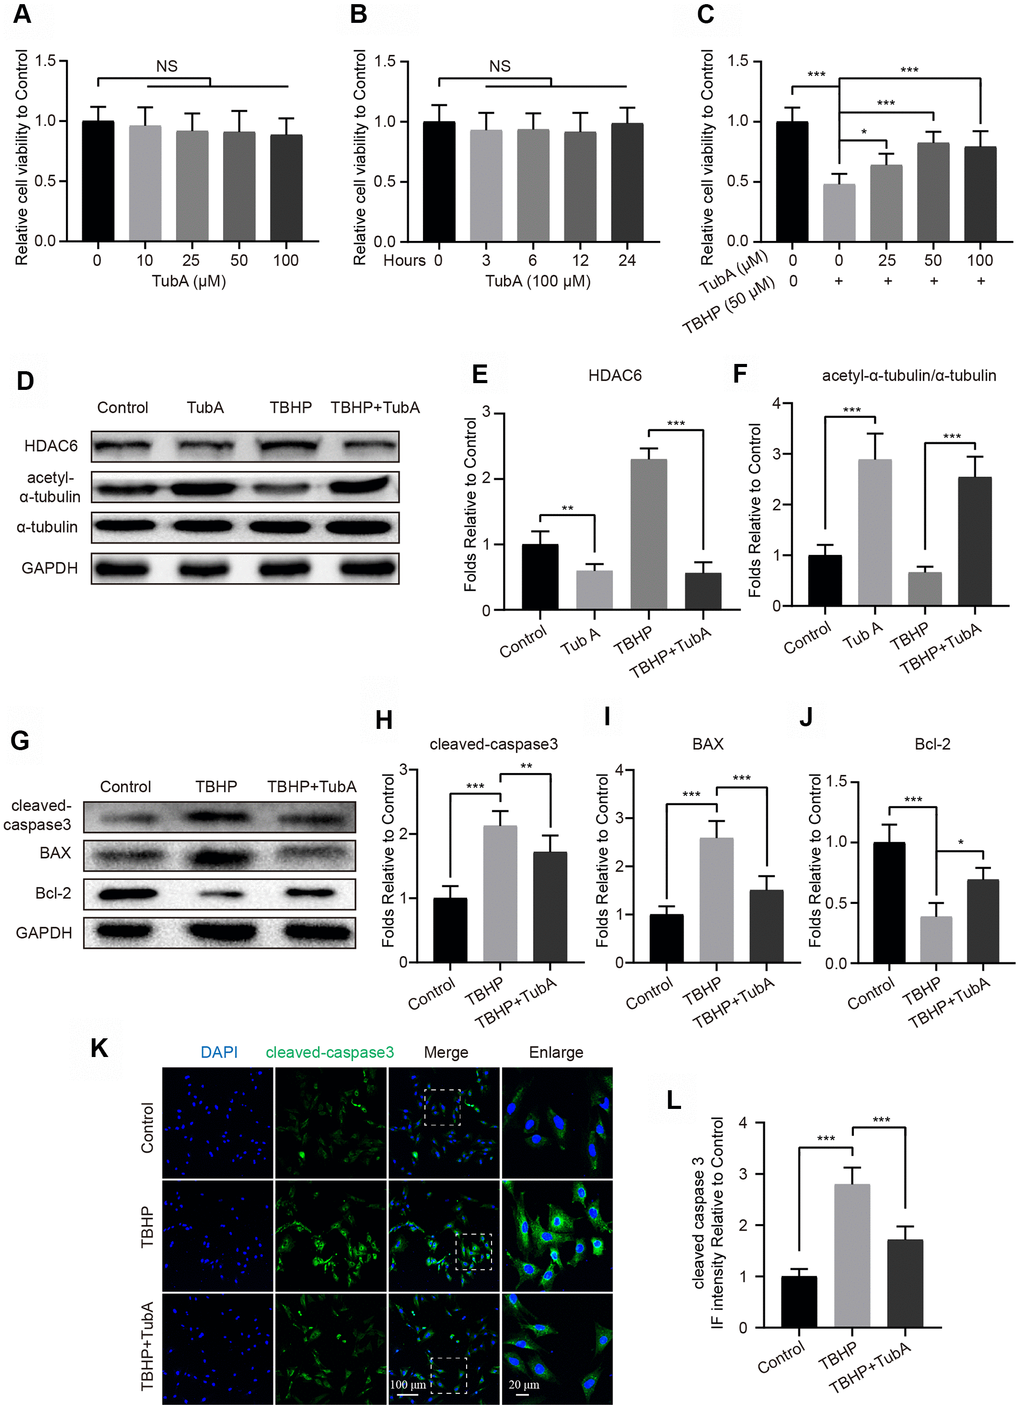 HDAC6 selective inhibitor TubA prevents TBHP-induced apoptosis in chondrocytes. (A) The cell viability of chondrocytes at 24 hours after different concentrations of TubA treatment. (B) The cell viability of chondrocytes treated with TubA at a concentration of 100 μM in a time-dependent manner. (C) The cell viability of chondrocytes at 24 hours after co-treatment of TBHP and TubA for 6 hours. (D–F) Western blotting and quantification of HDAC6 and acetyl-α-tubulin in each group. Chondrocytes were treated TBHP or/and TubA for 6 hours. (G–J) Western blotting and quantification of apoptotic markers in each chondrocyte group as above. (K, L) IF staining and quantification of cleaved caspase 3 in each chondrocyte group as above, scale bar = 100 μm, scale bar (enlarged) = 20 μm. N = 5, GAPDH was the loading control, significance: *P